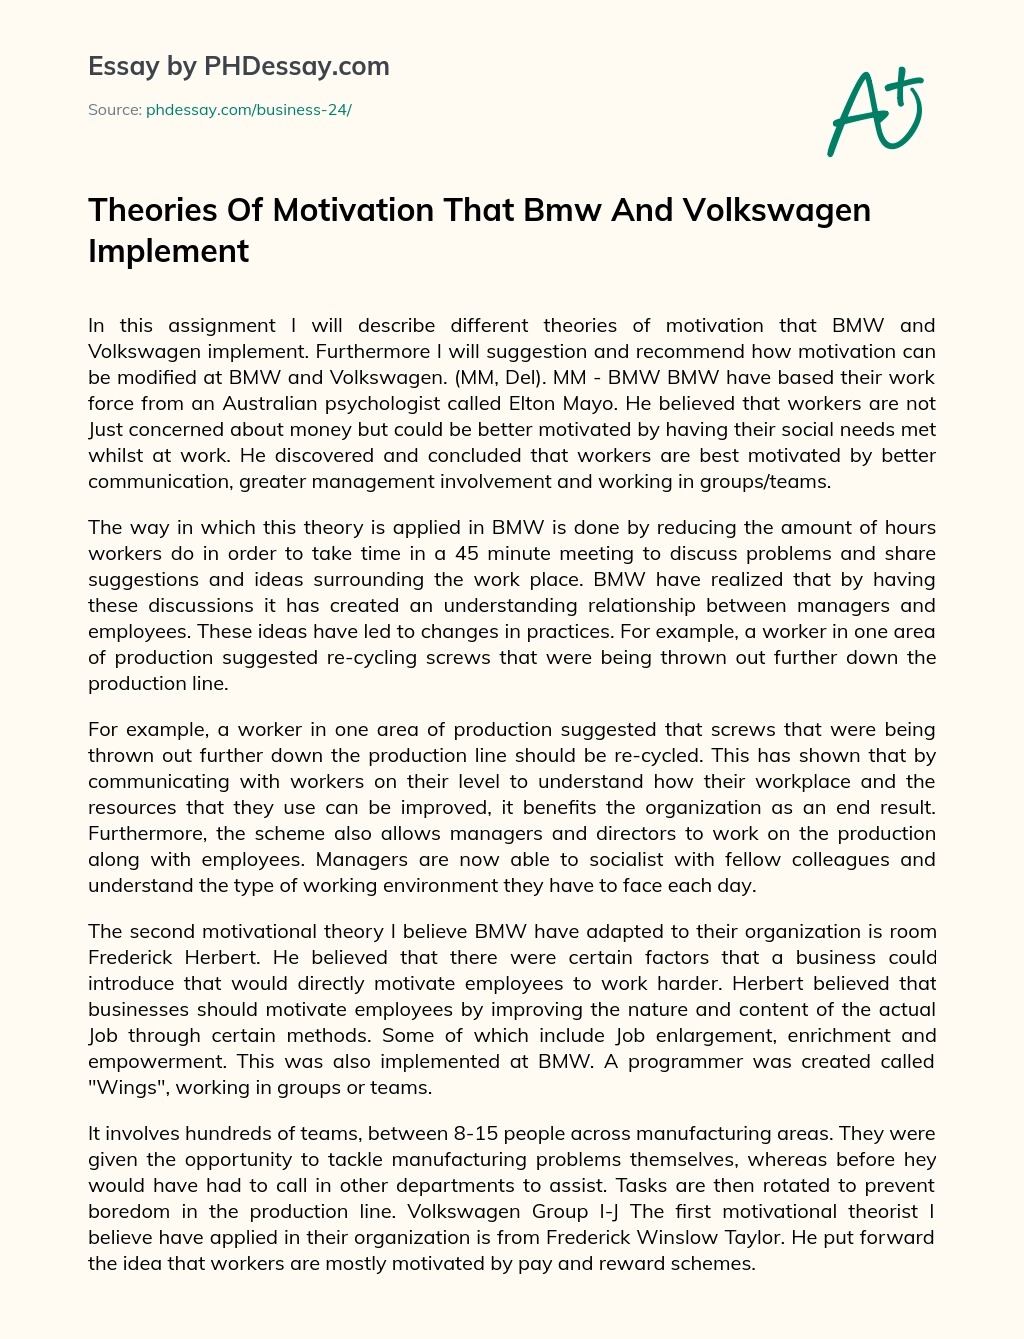 Theories Of Motivation That Bmw And Volkswagen Implement essay